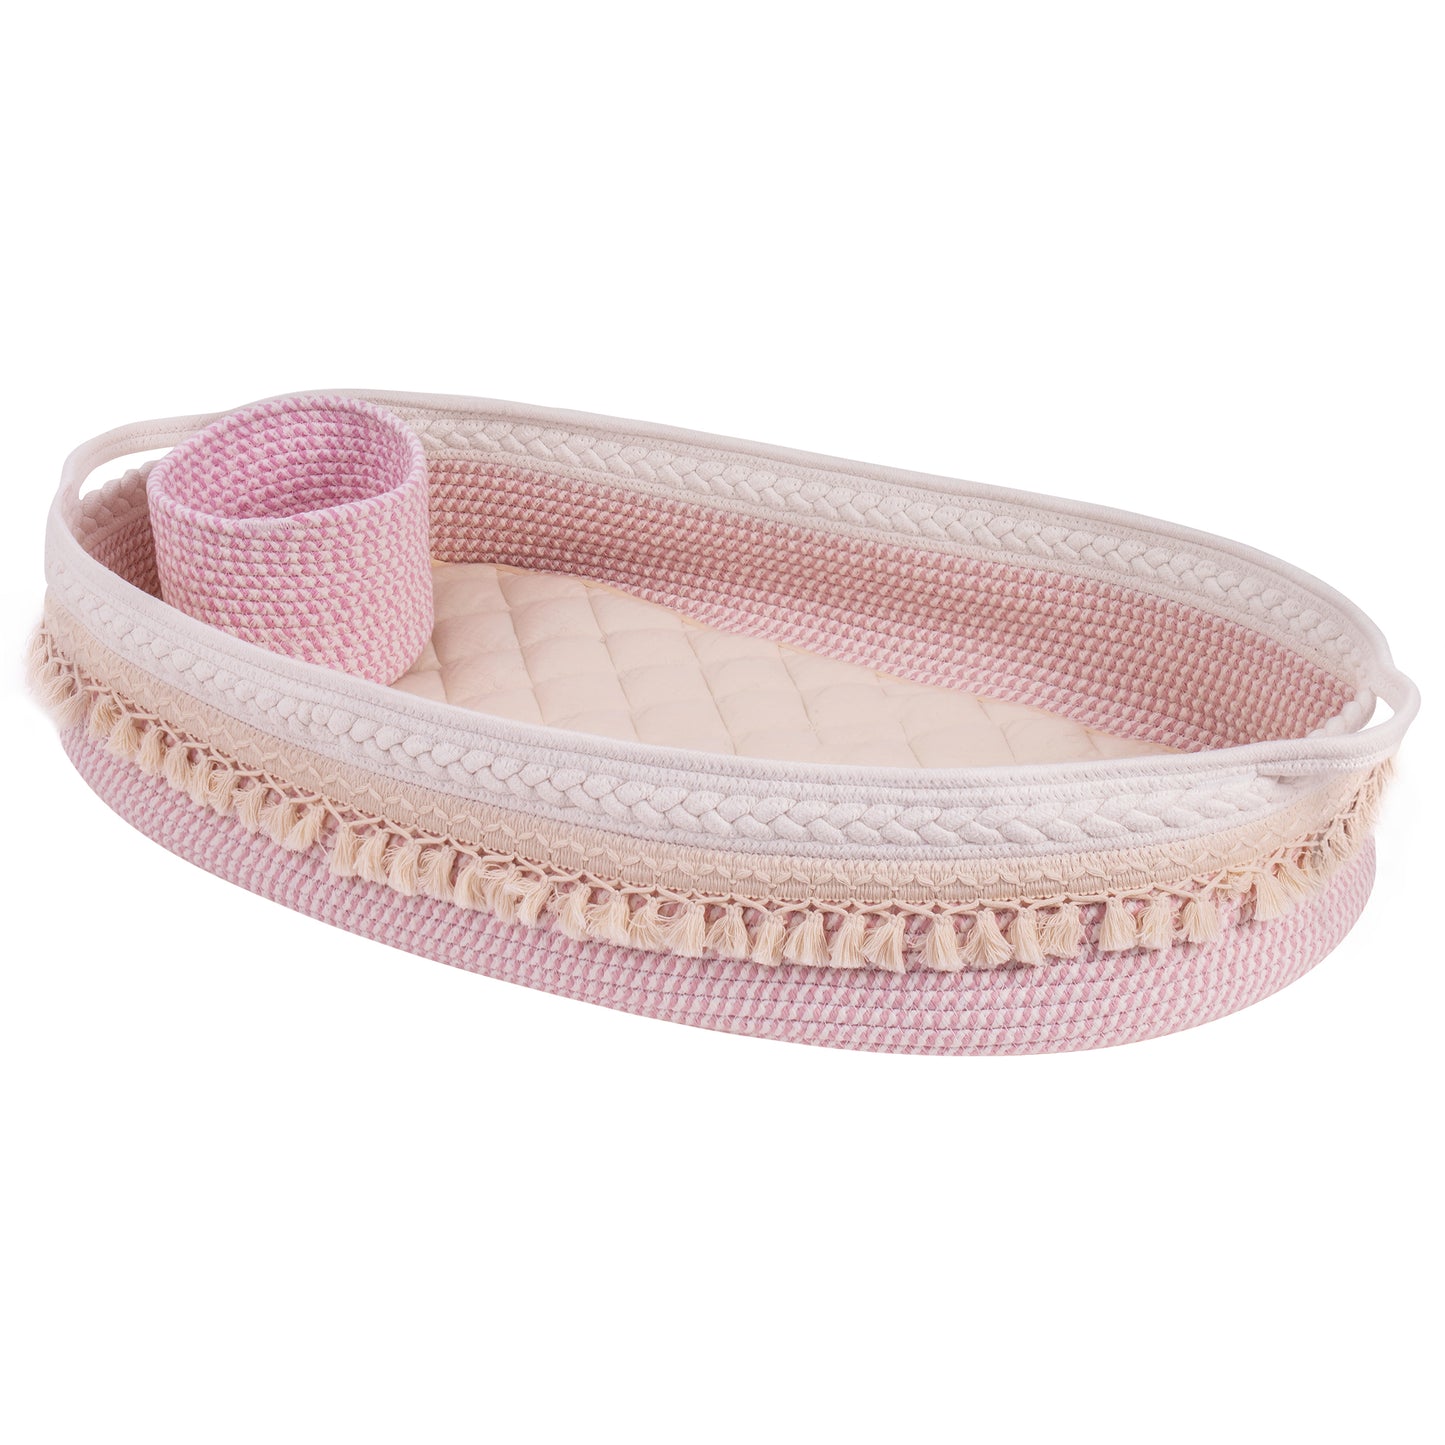 Baby Changing Basket, Handmade Woven Cotton Rope Moses Basket, Changing Table Topper with Mattress Pad(Beige&Pink)